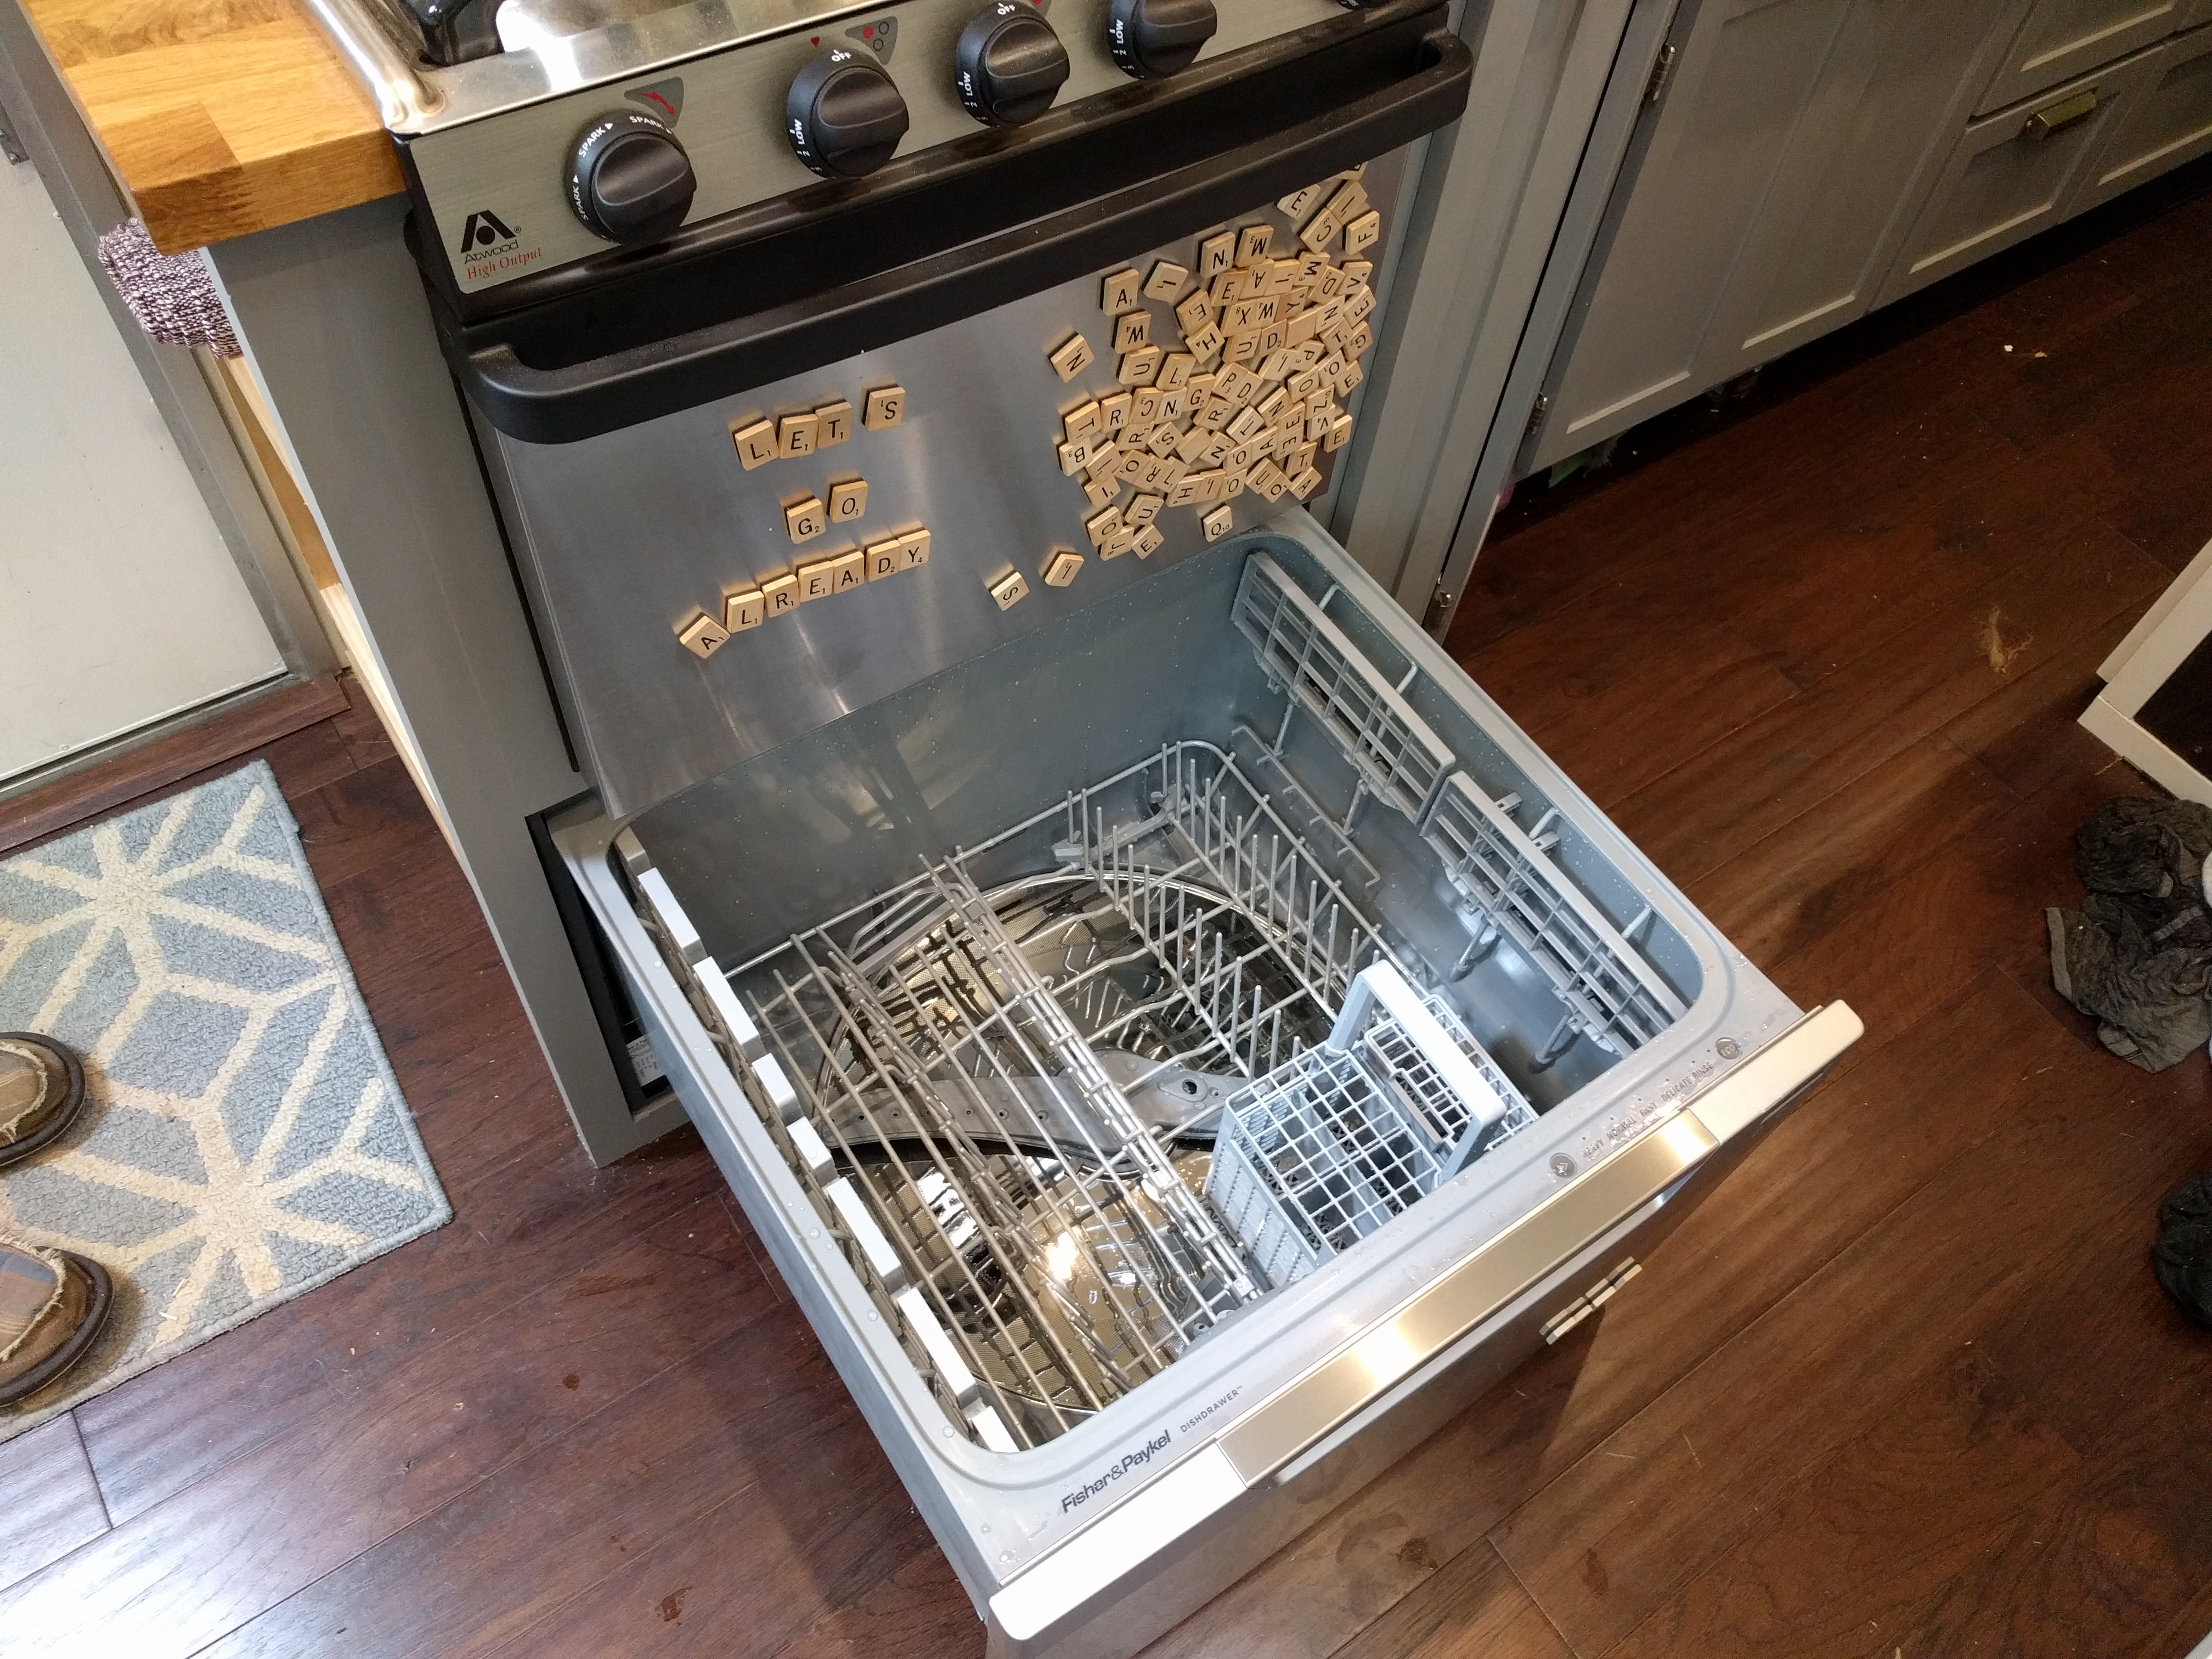 Dishwashers for Tiny Spaces - Tiny Life Gear